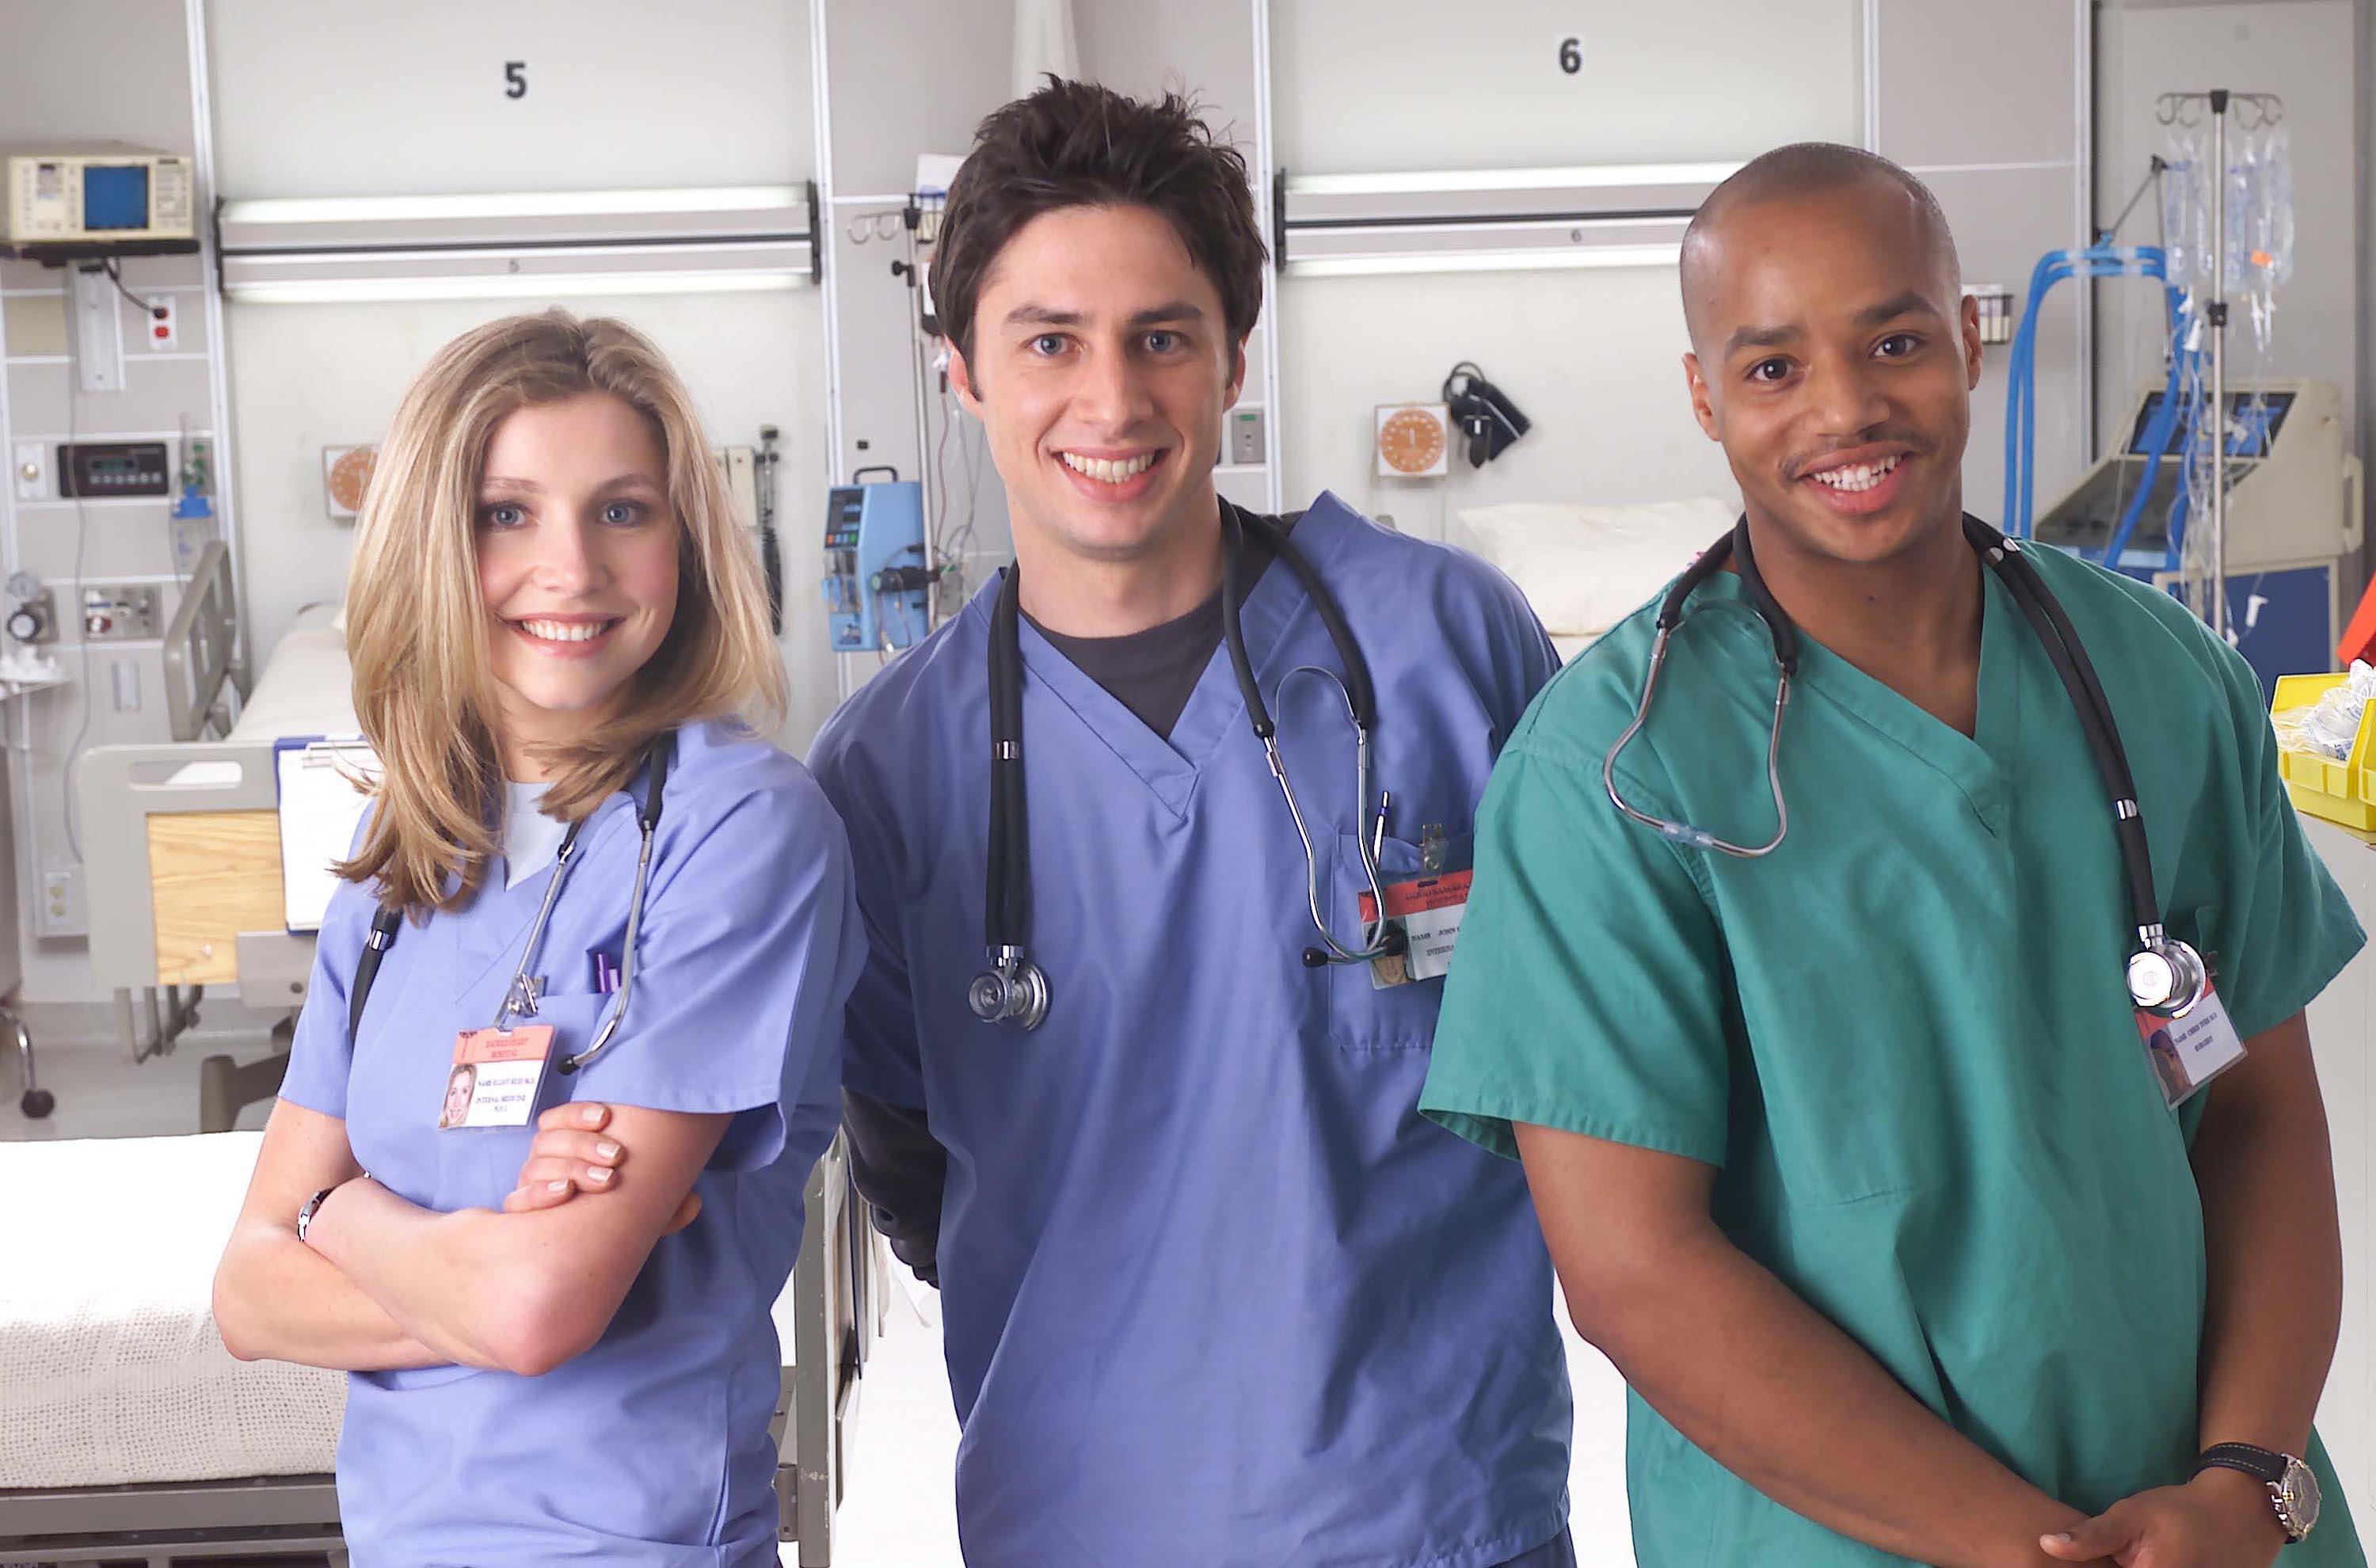 How The Costume Designer For ‘Scrubs’ Changed The Scrubs Clothing Industry